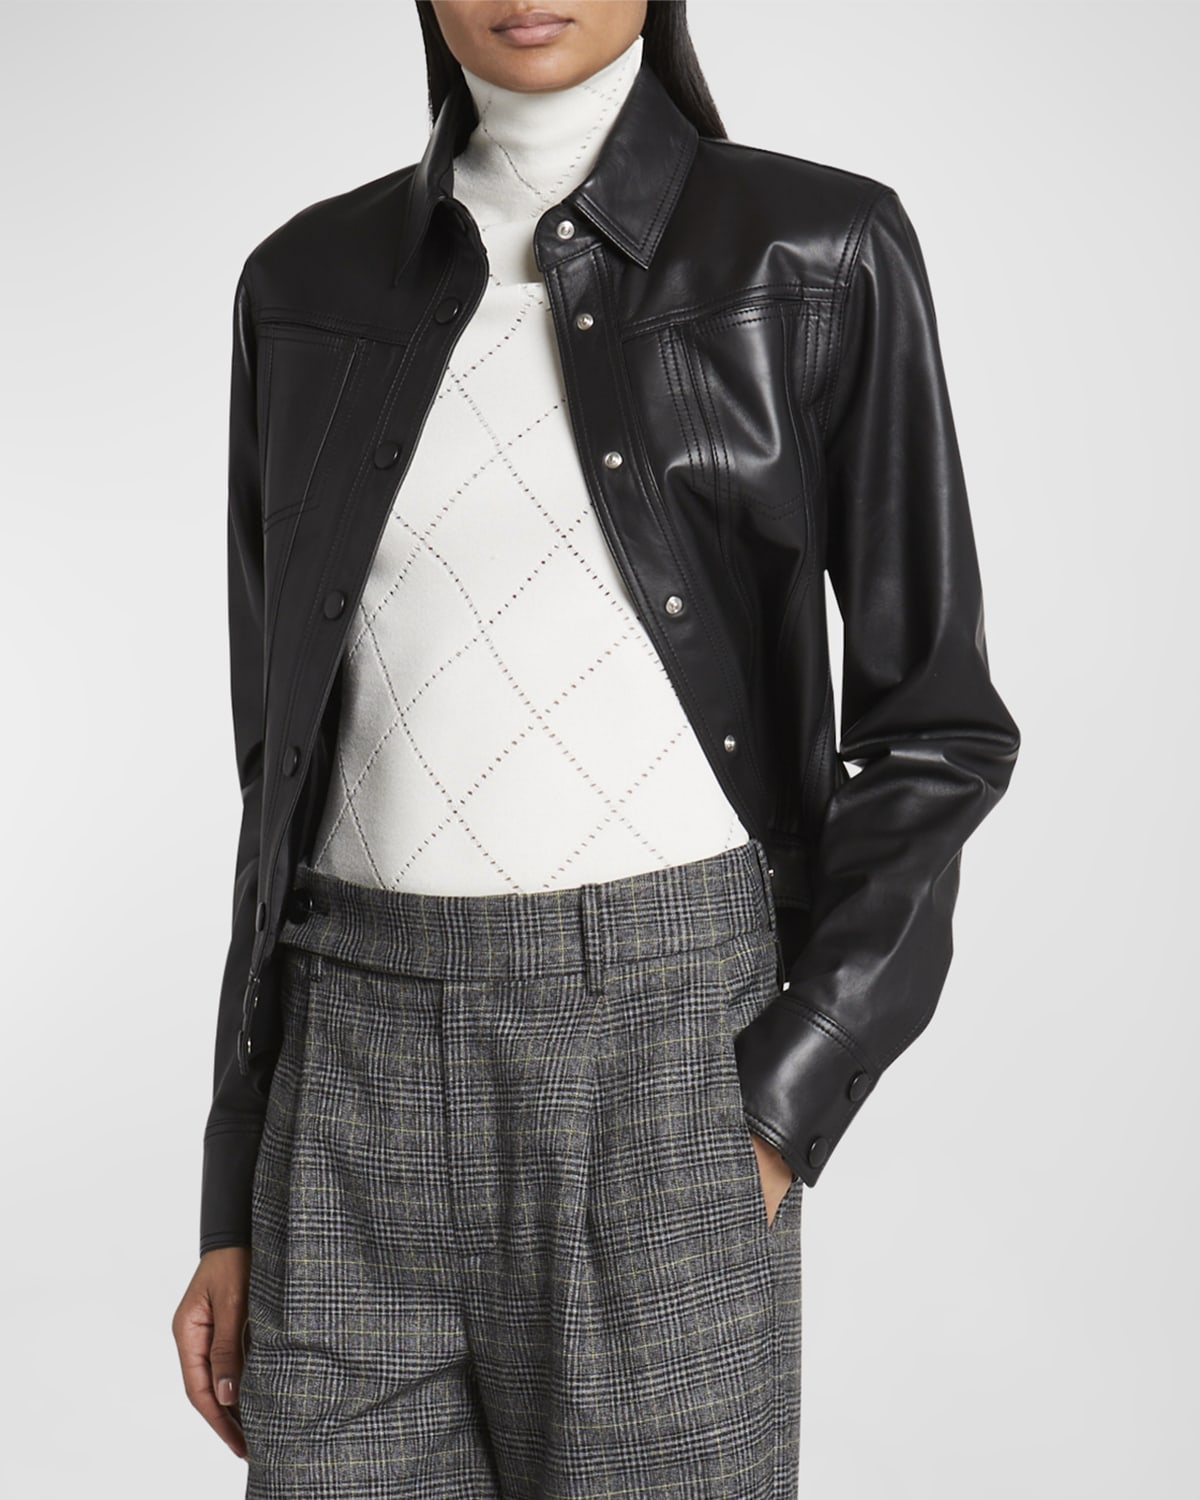 PROENZA SCHOULER WHITE LABEL FITTED FAUX-LEATHER JACKET